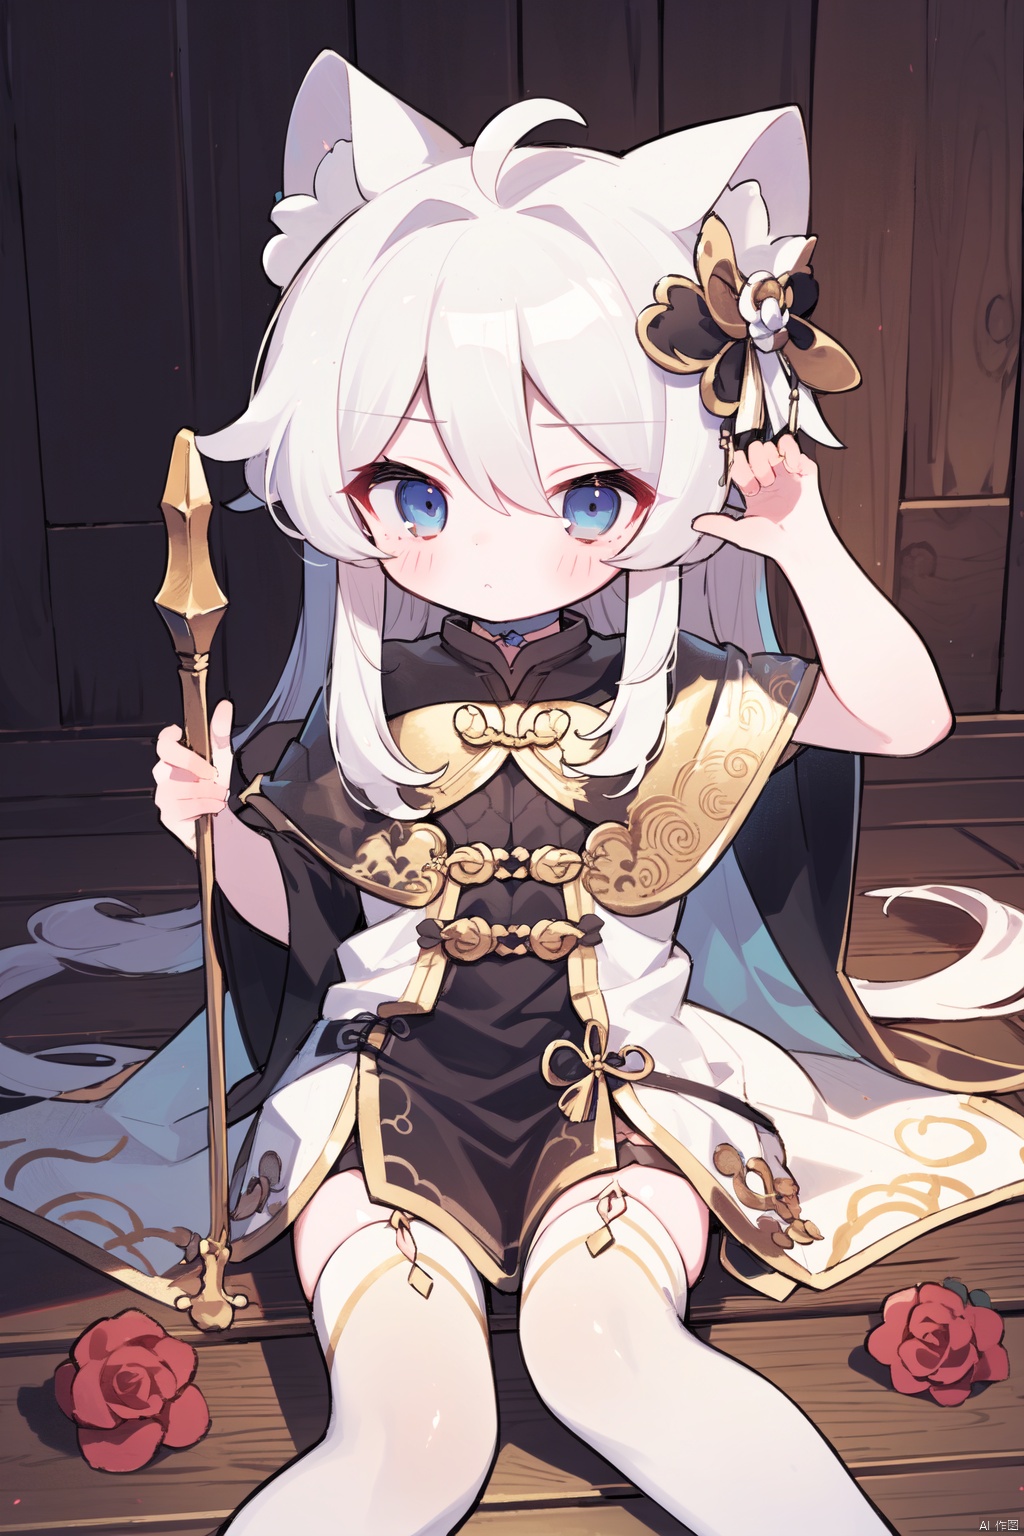  best quality, amazing quality, very aesthetic,petite,loli,1boy, solo, white_eye, thighhighs, rose, long_hair, looking_at_viewer,  white_hair,  hair_between_eyes, choker, bangs,blush,  Gypsy costume, wooden cane, white falcon (\shen ming shao nv\)